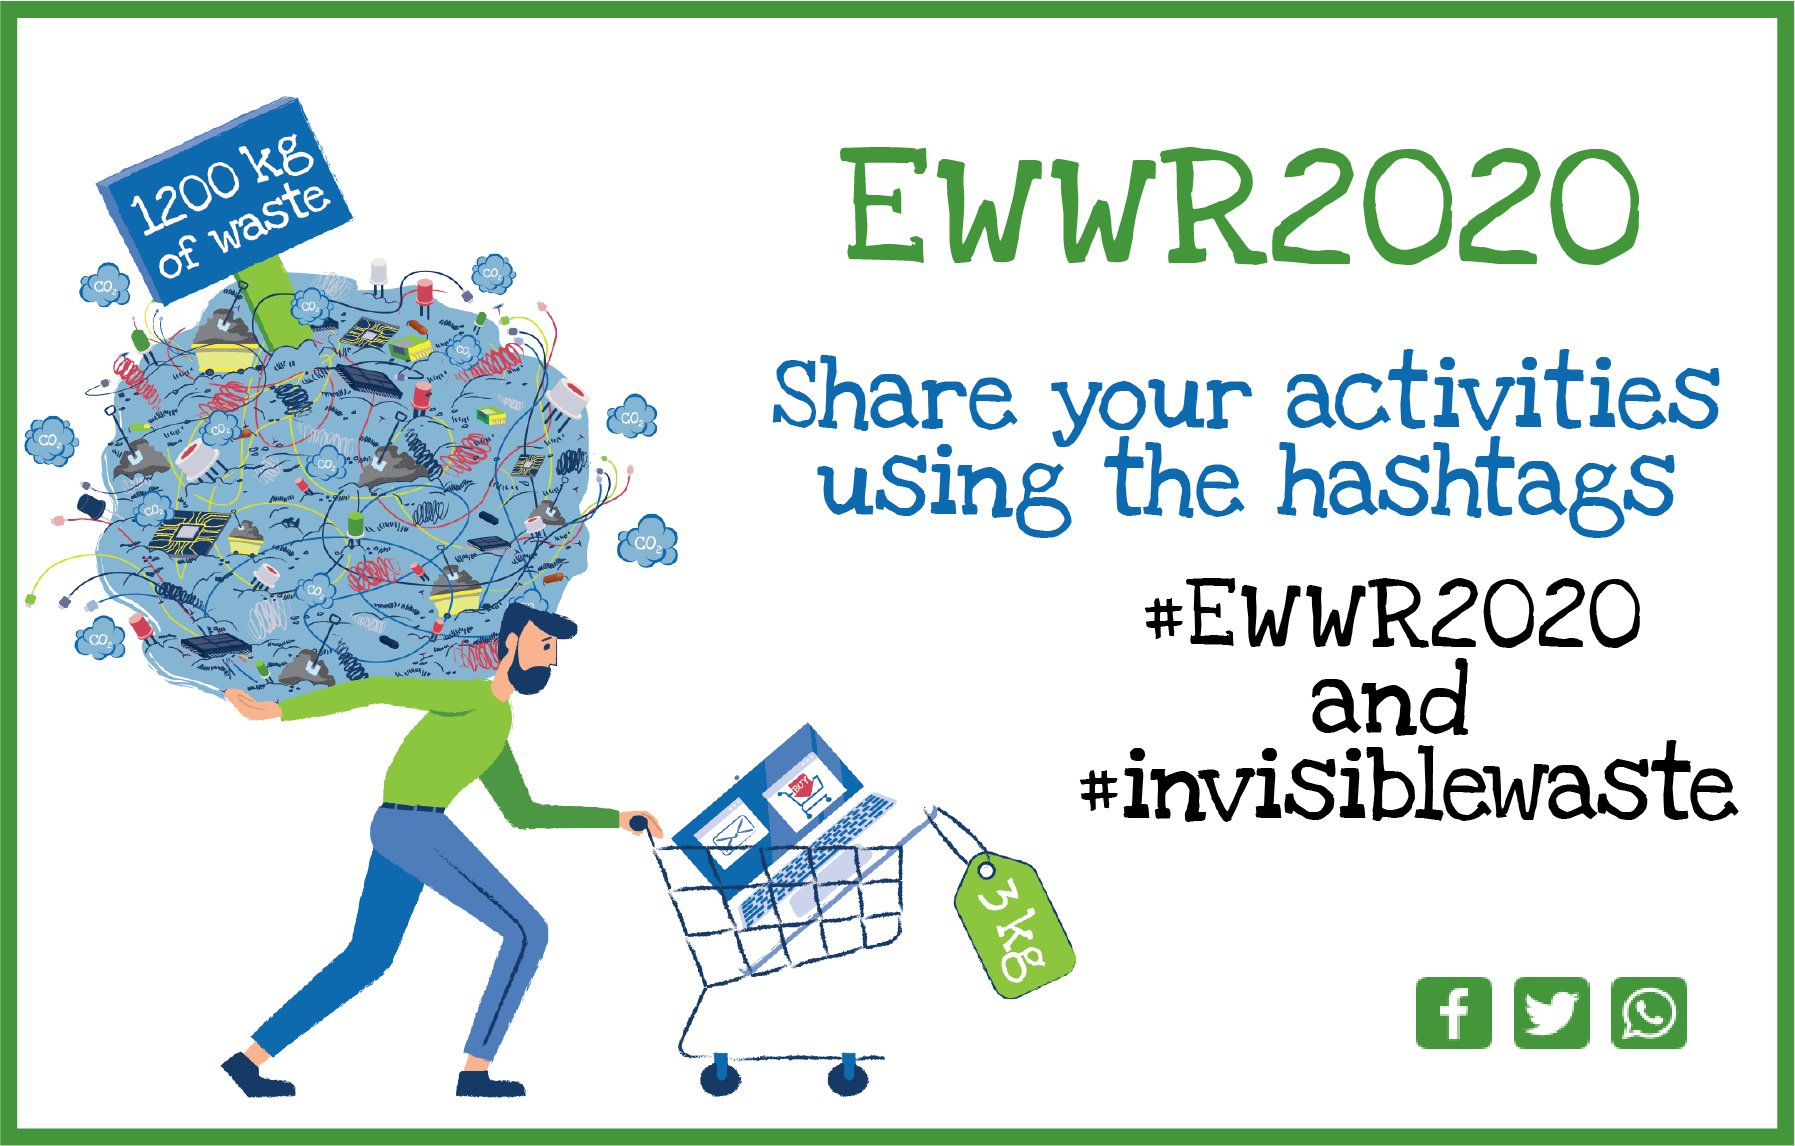 Over 10,000 actions for the EWWR 2020